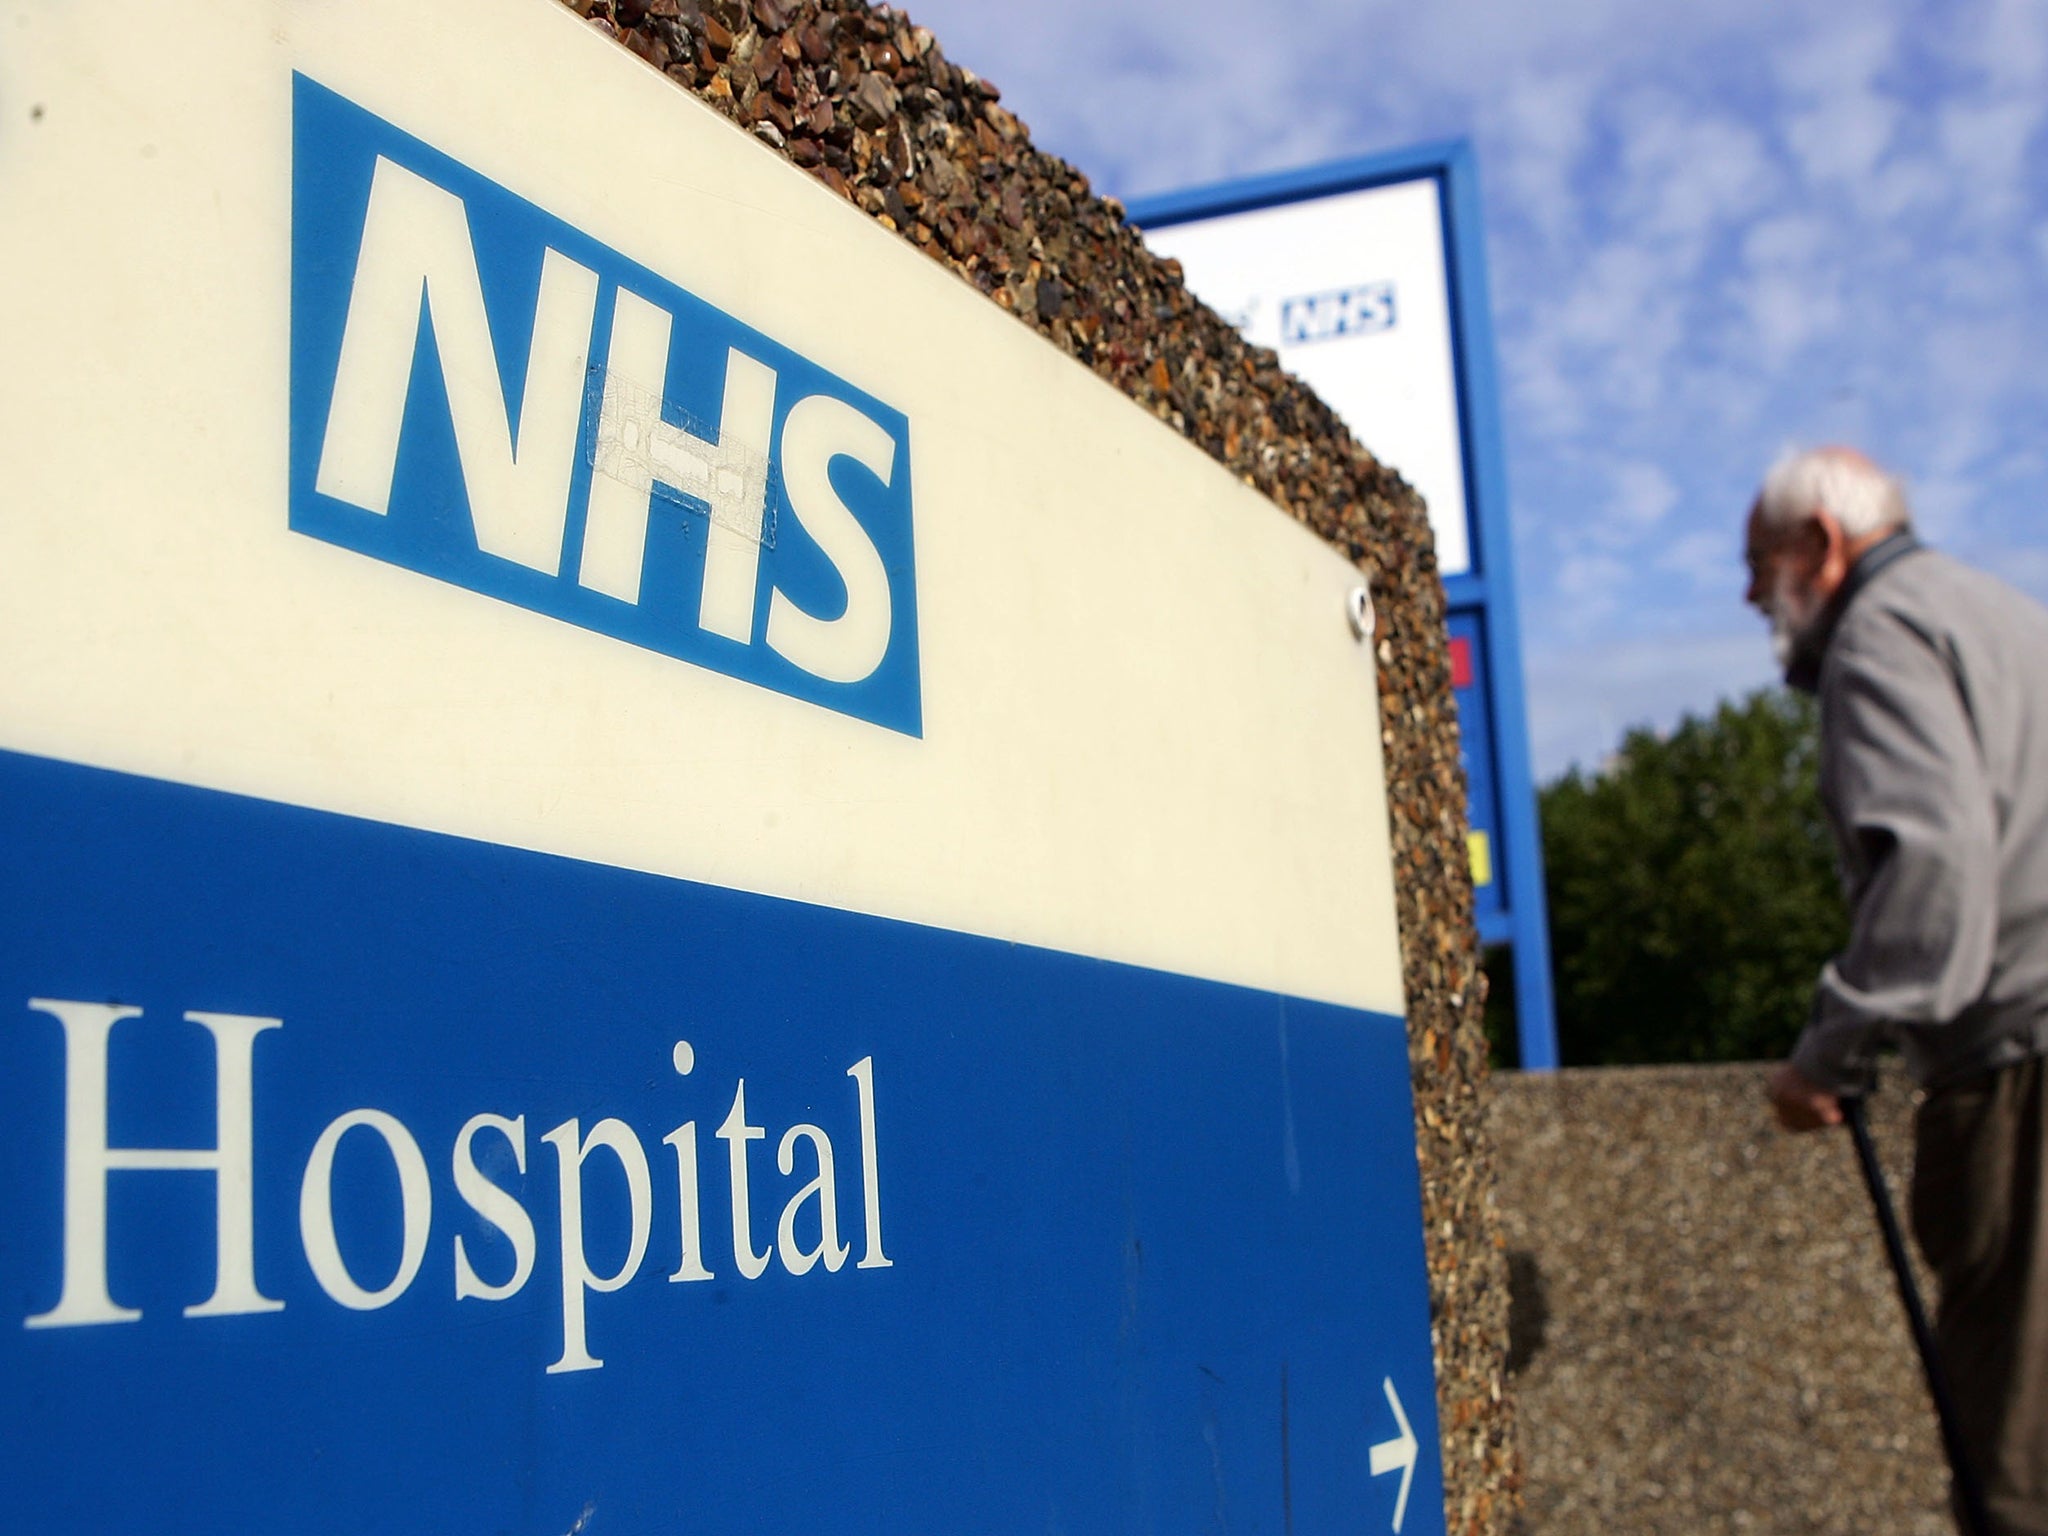 For every A&E department seeing 50,000 patients a year, exit block accounted for 13 deaths